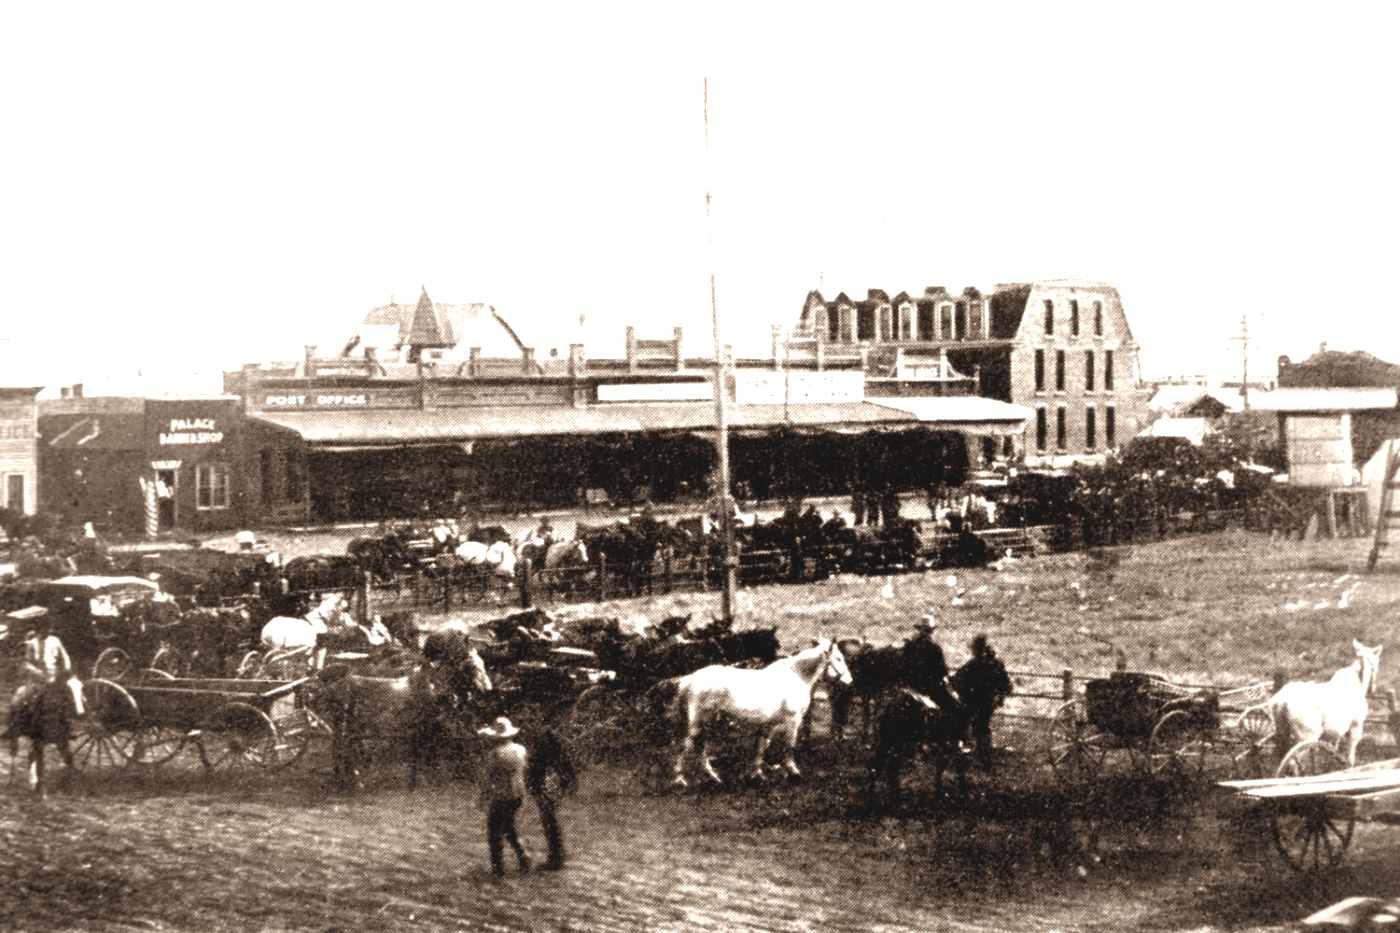 Town Square in Anson in 1890